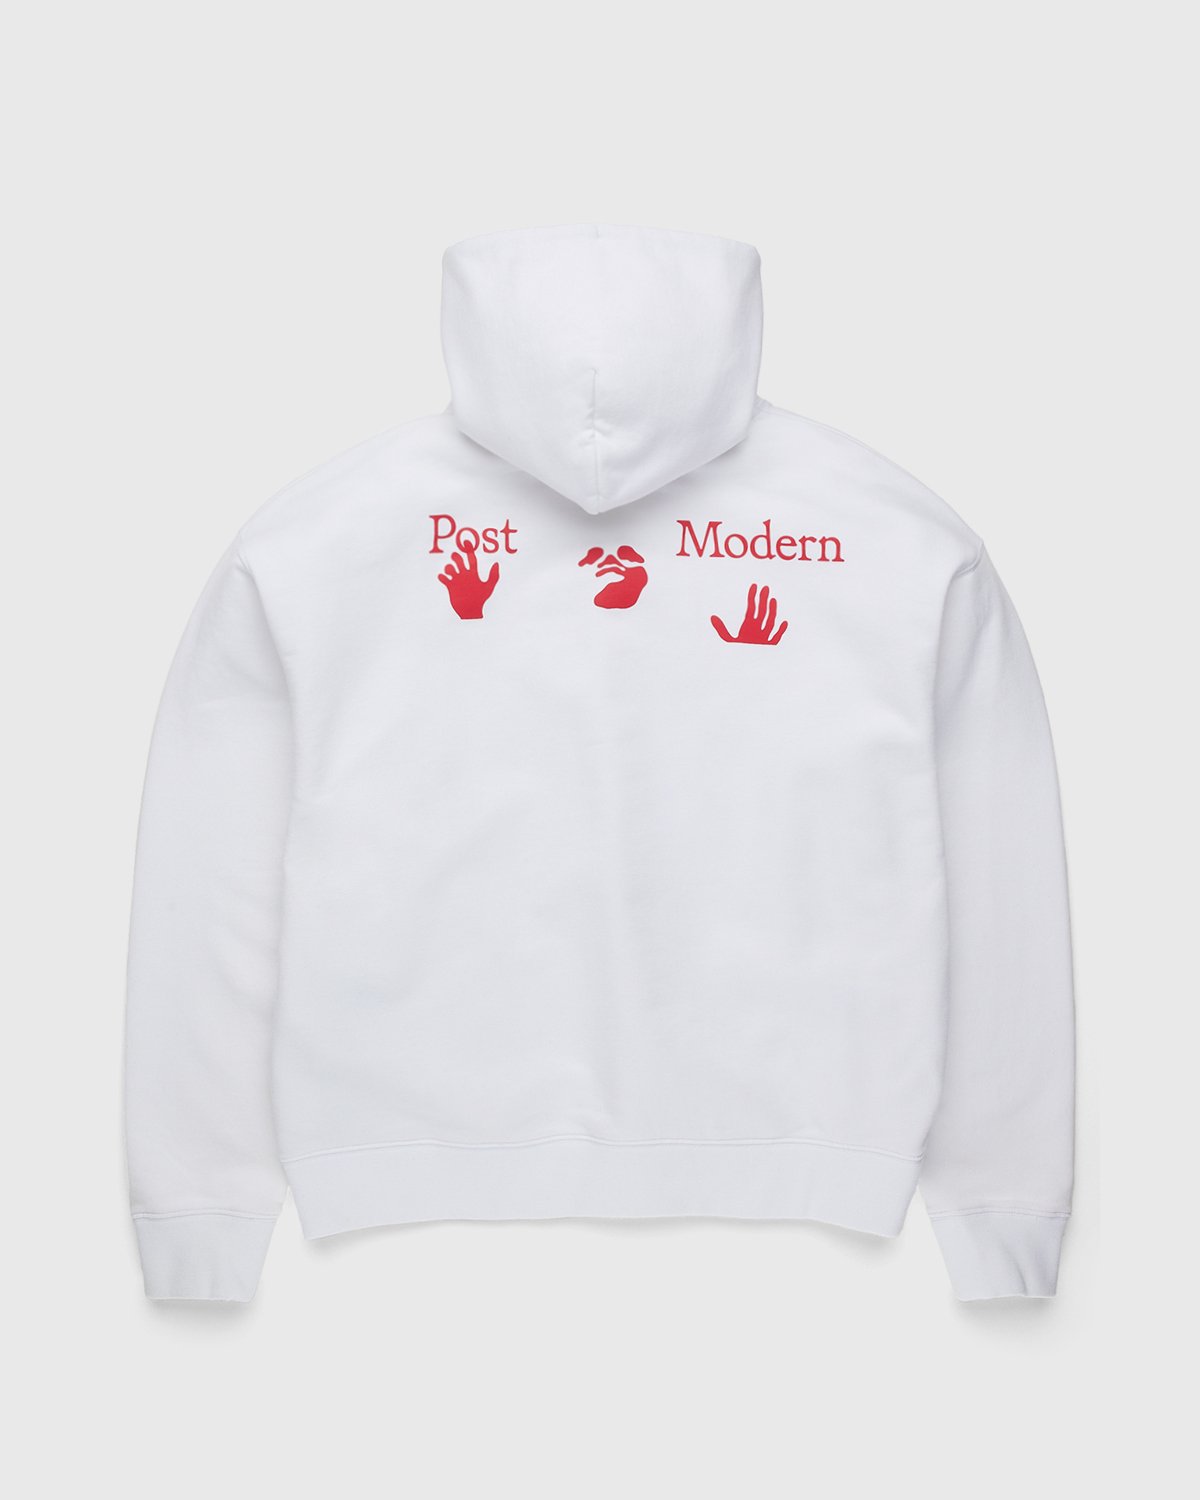 Off-White - Support Post-Modern Hoodie White/Red - Clothing - White - Image 2